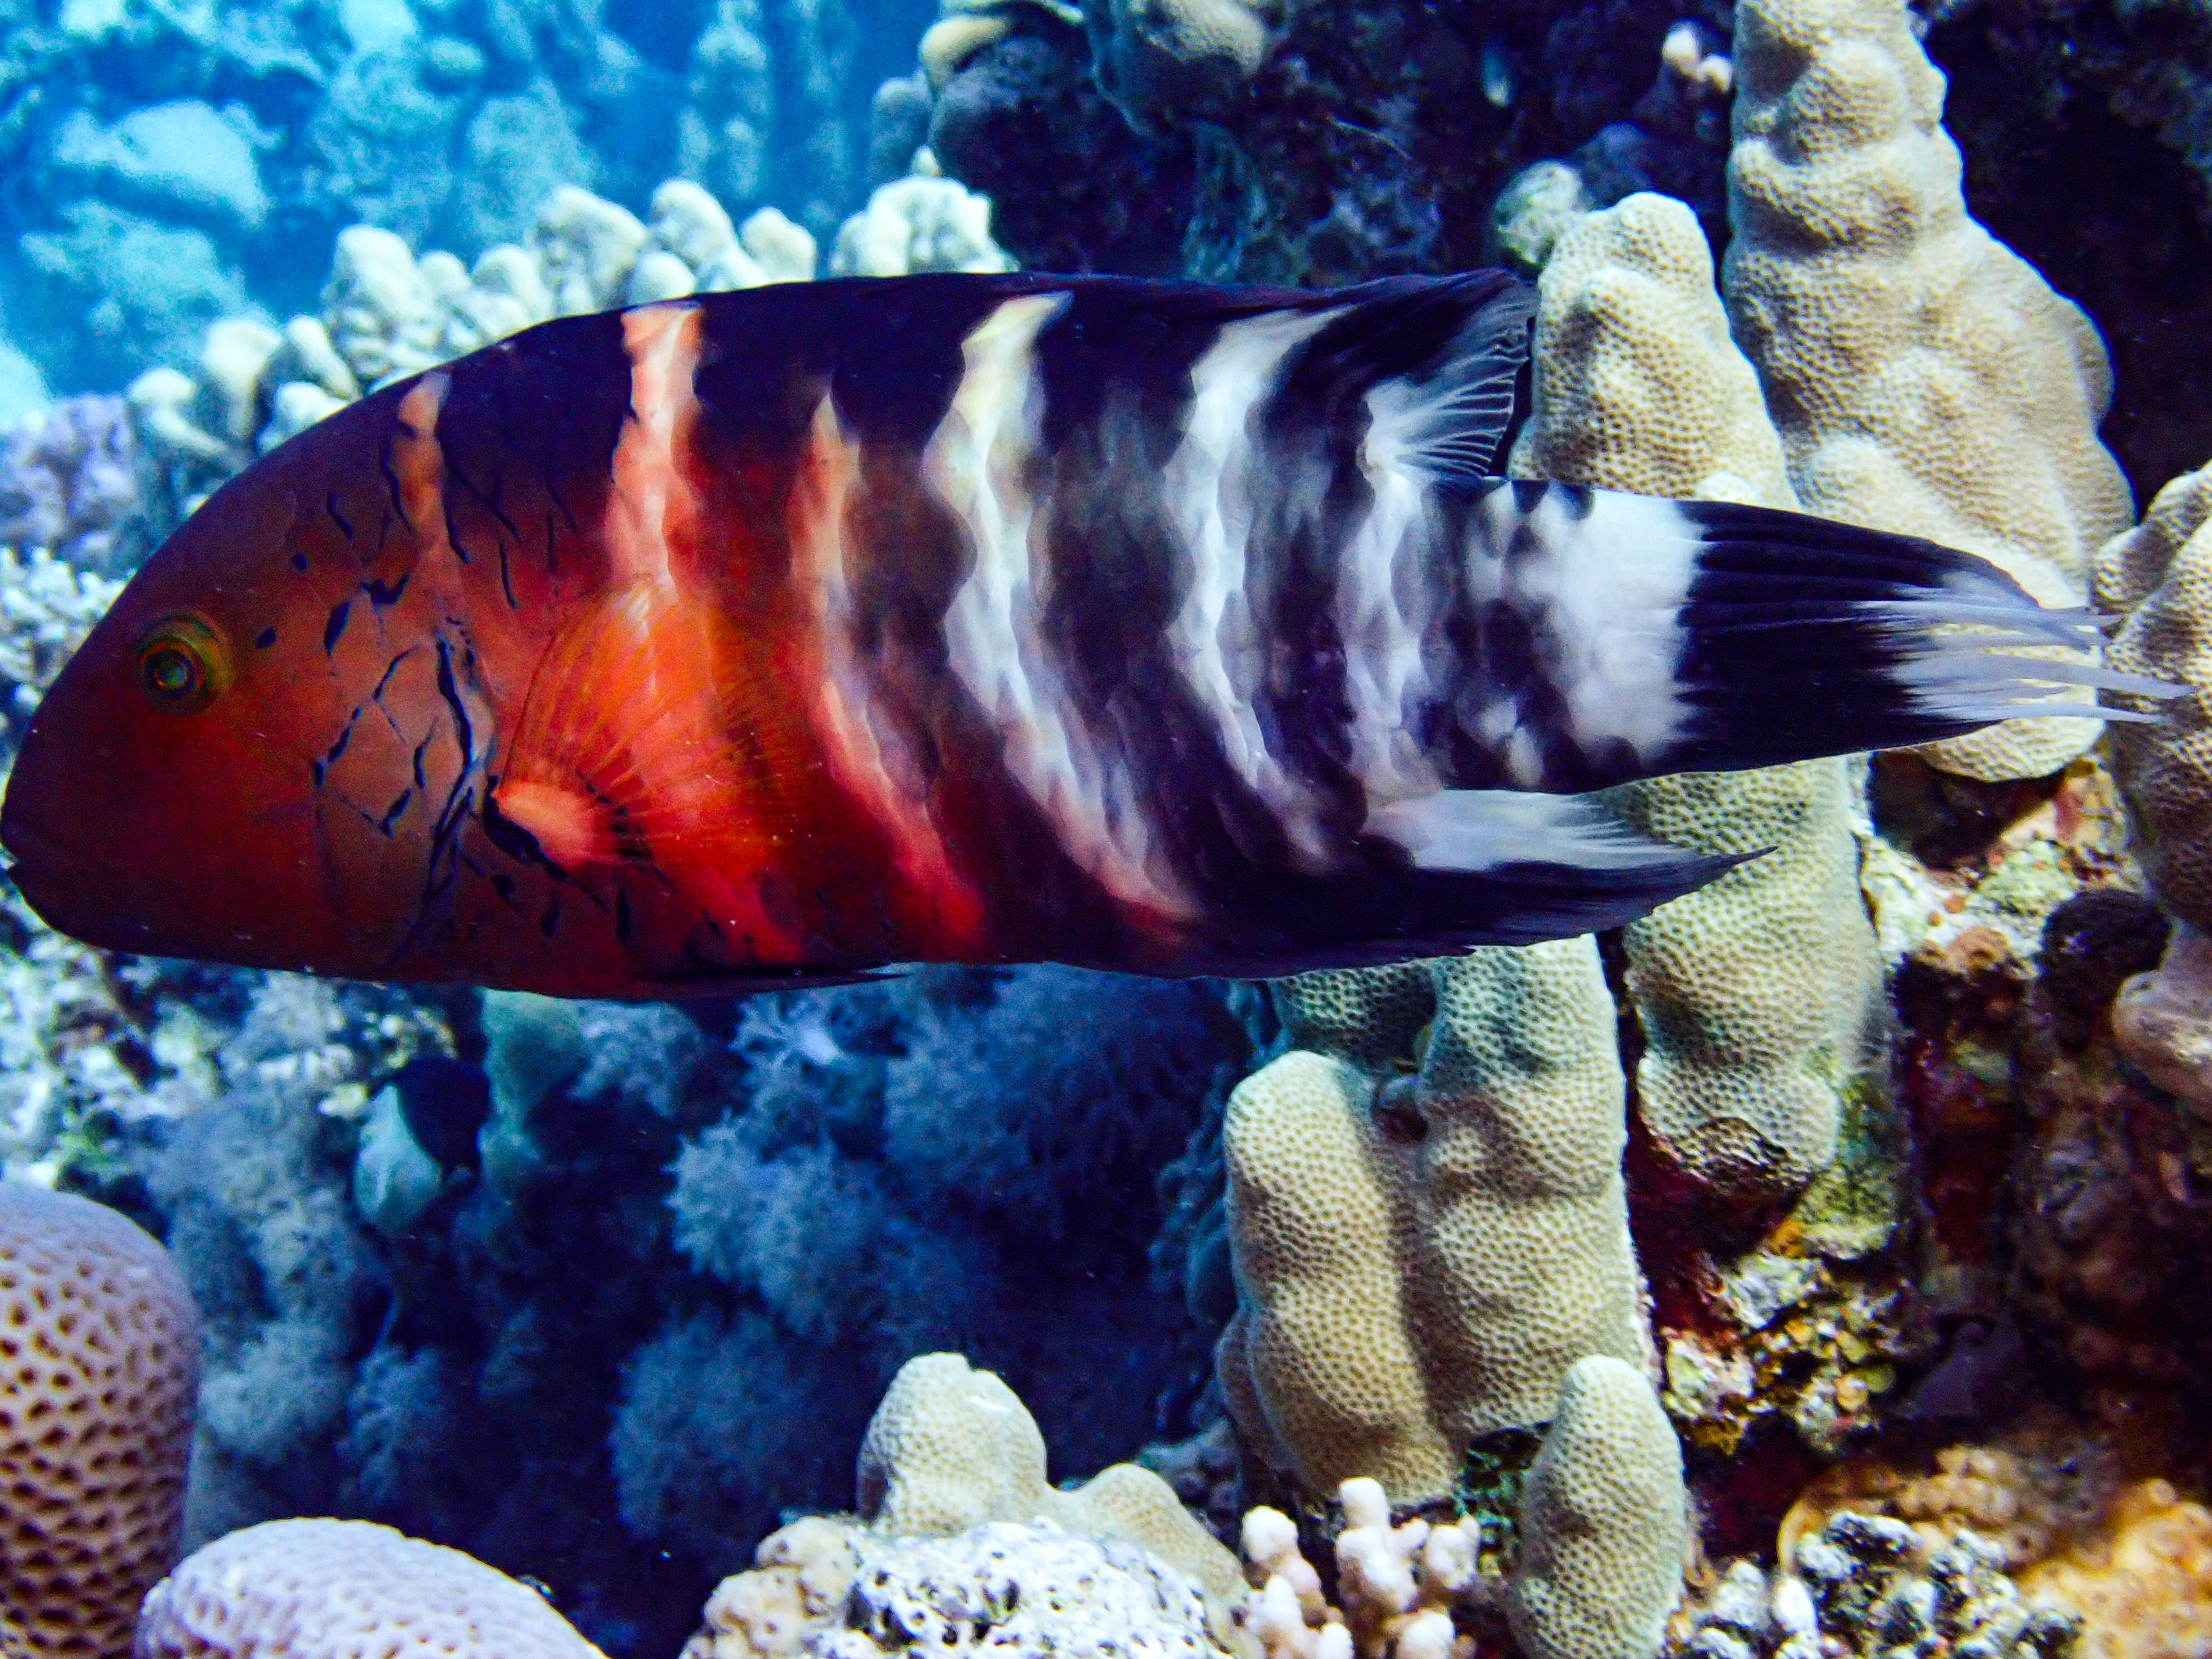 Redbreasted Wrasse